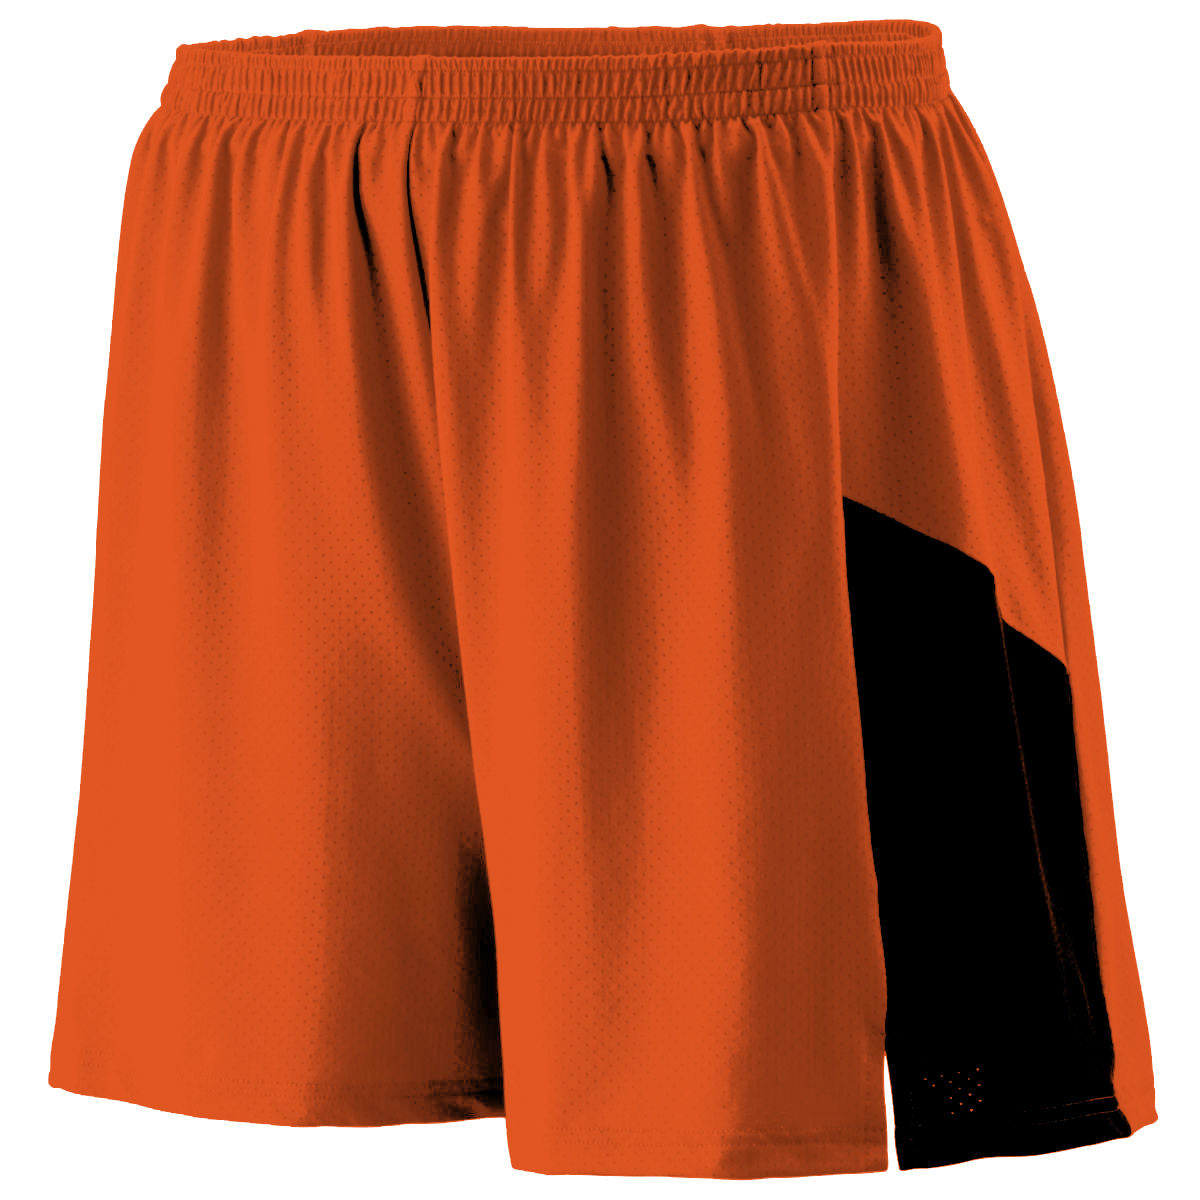 Augusta Sportswear Sprint Shorts in Orange/Black  -Part of the Adult, Adult-Shorts, Augusta-Products, Track-Field product lines at KanaleyCreations.com